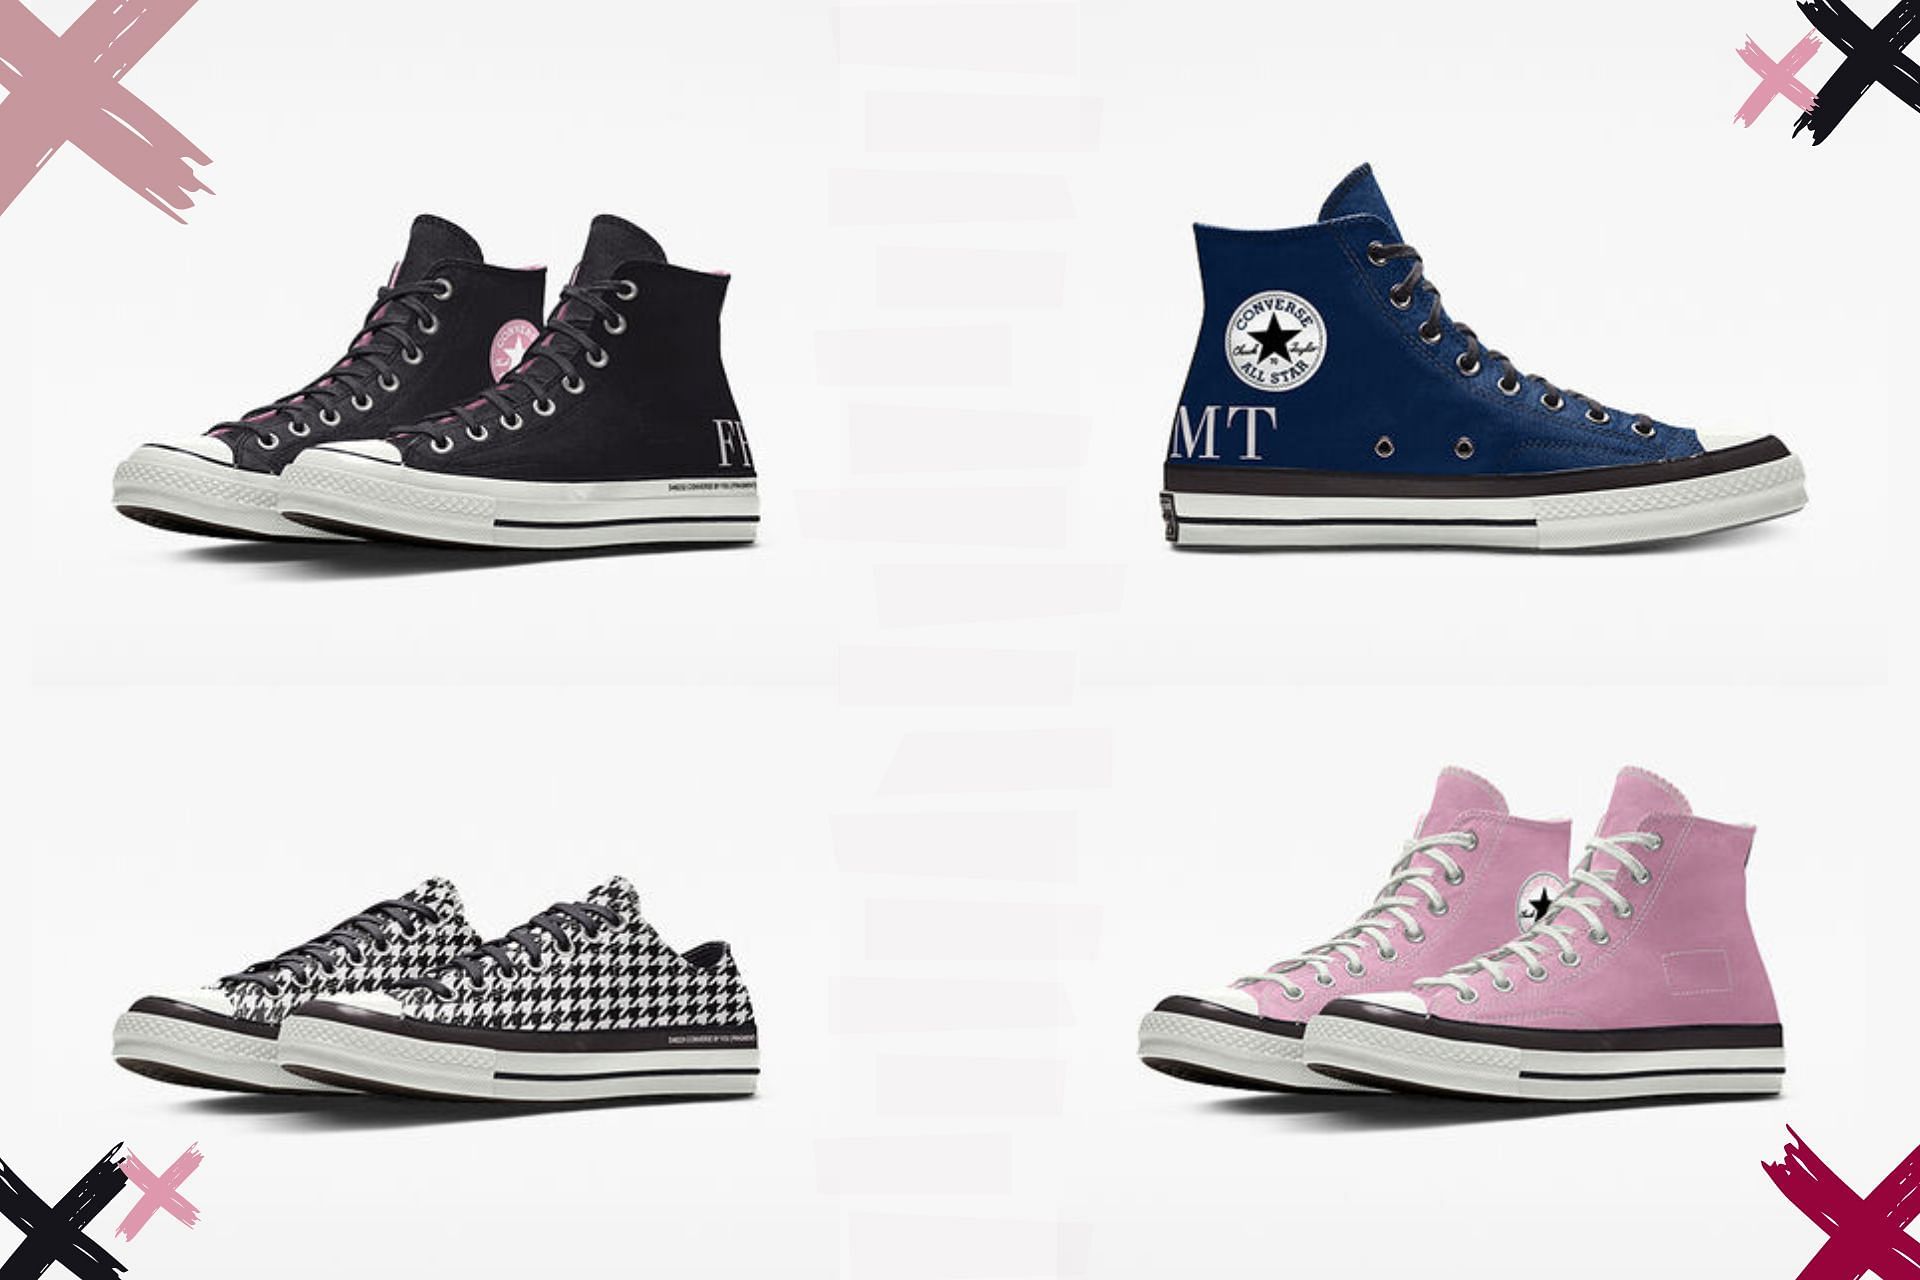 The upcoming Fragment x Converse FRGMT Chuck 70 sneaker collection program lets the consumers customize the sneaker model (Image via Sportskeeda)